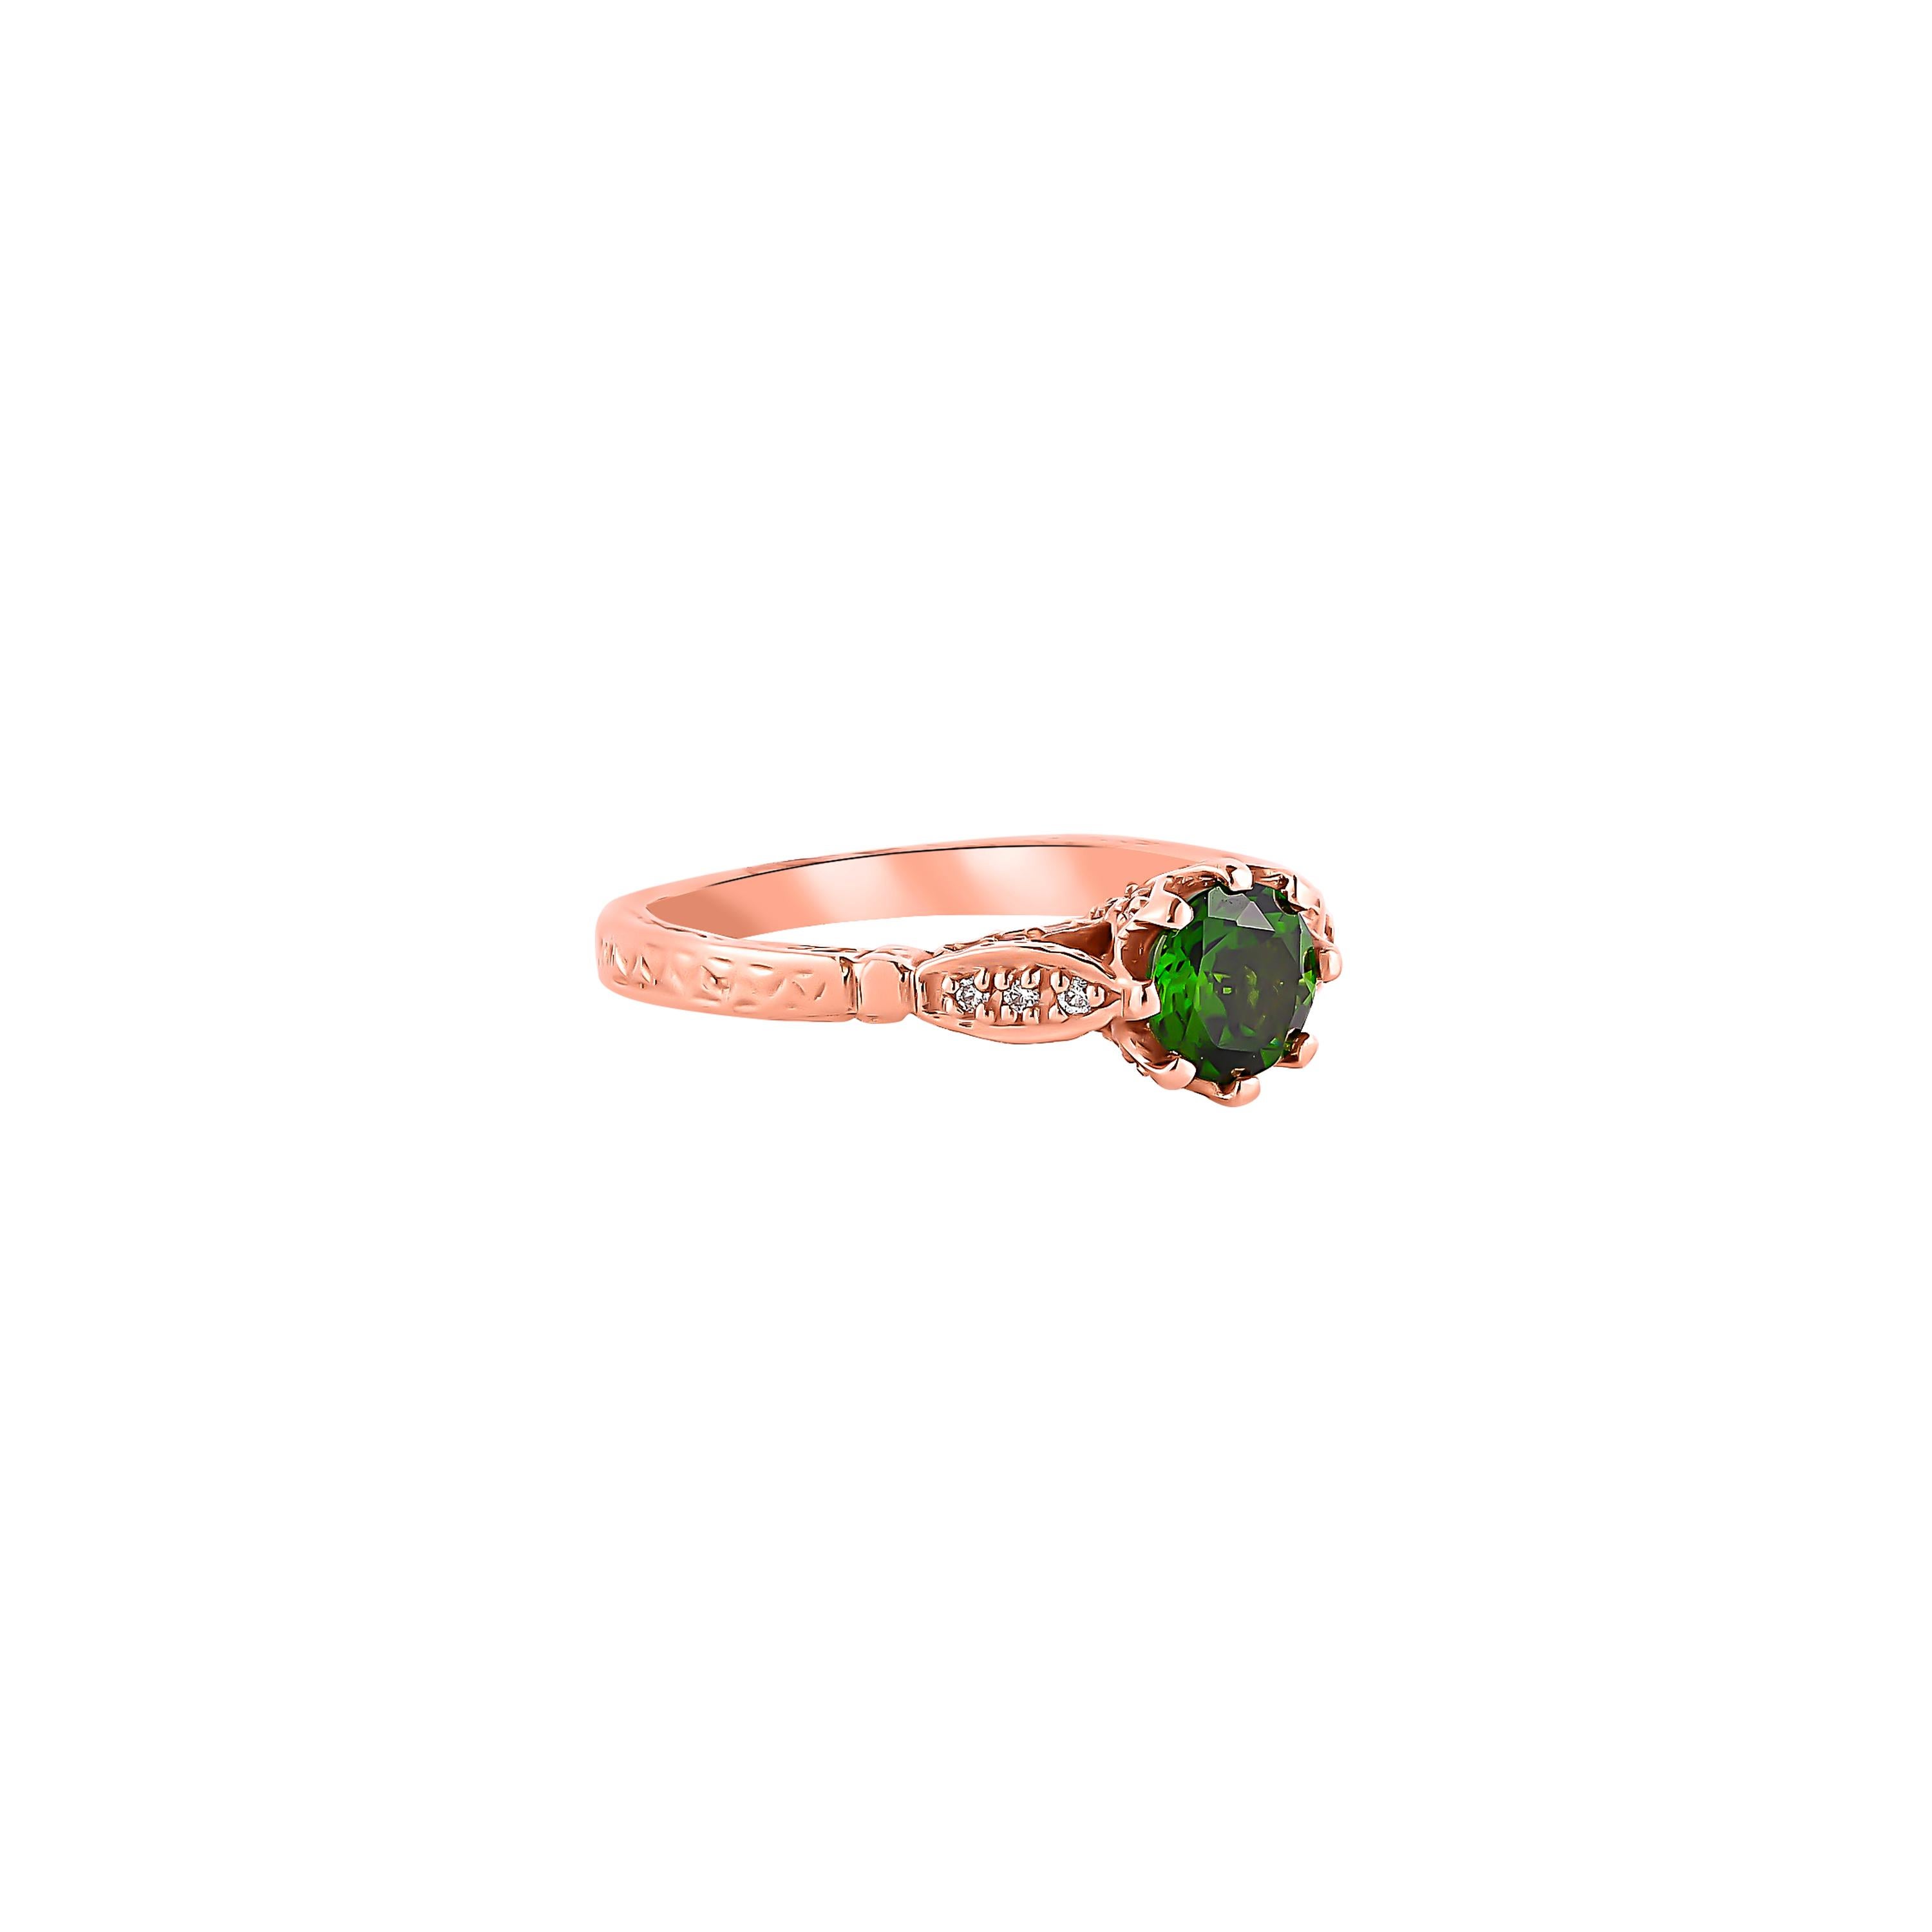 Unique and Designer Cocktail Rings by Sunita Nahata Fine Design.

Classic Chrome Diopside ring in 14K White gold with Diamond. 

Chrome Diopside: 0.95 carat, 6.00mm size, round shape.
Diamond: 0.15 carat, 1.10mm size, round shape, G colour, VS